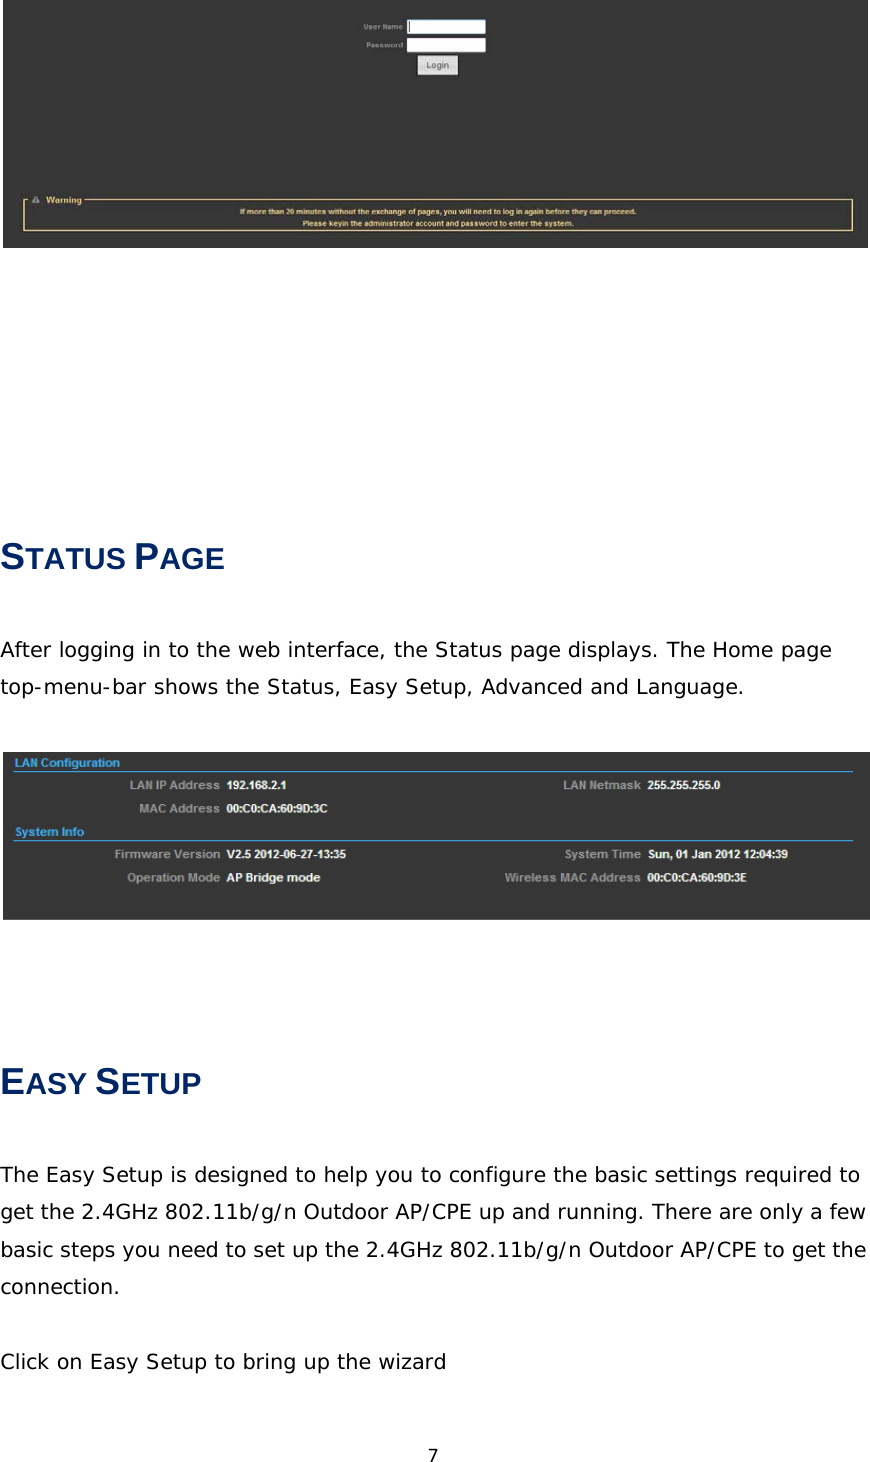 7STATUS PAGE After logging in to the web interface, the Status page displays. The Home page top-menu-bar shows the Status, Easy Setup, Advanced and Language.  EASY SETUP The Easy Setup is designed to help you to configure the basic settings required to get the 2.4GHz 802.11b/g/n Outdoor AP/CPE up and running. There are only a few basic steps you need to set up the 2.4GHz 802.11b/g/n Outdoor AP/CPE to get the connection.  Click on Easy Setup to bring up the wizard   